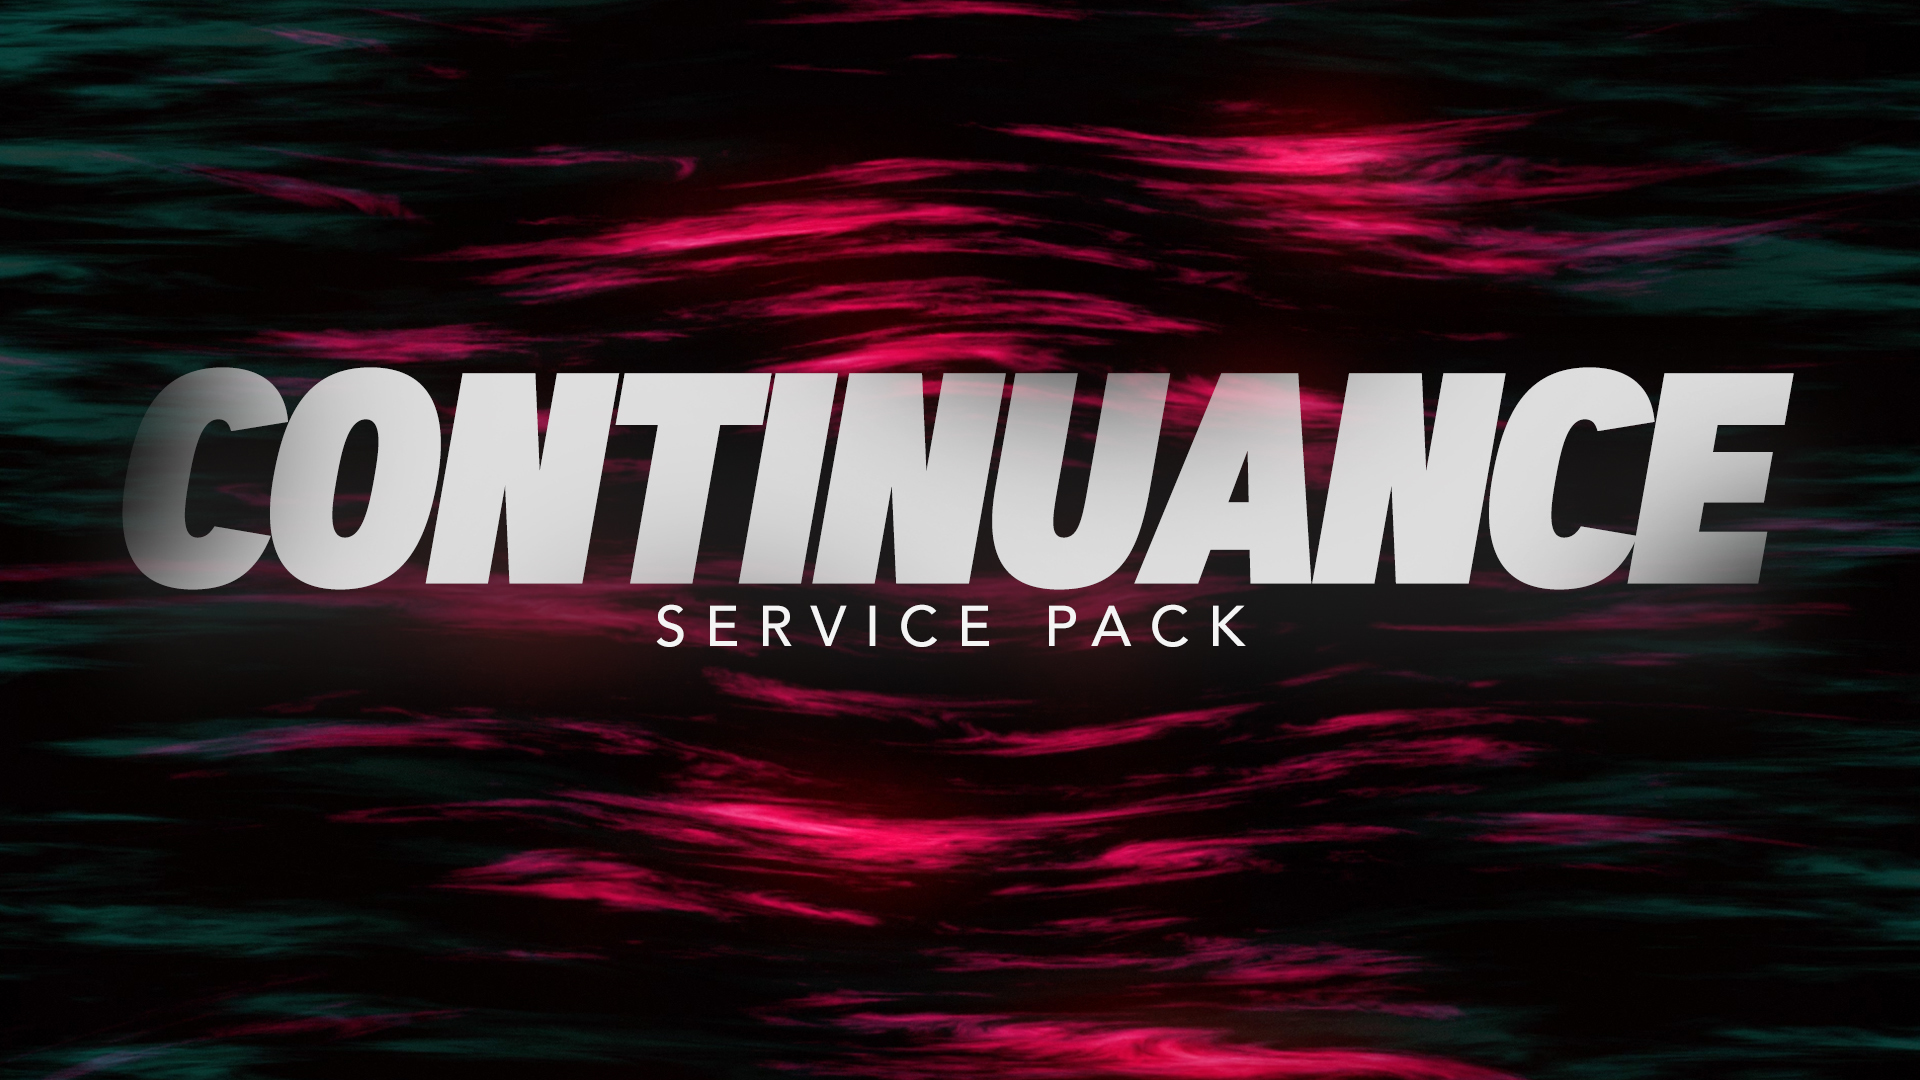 Continuance Service Pack